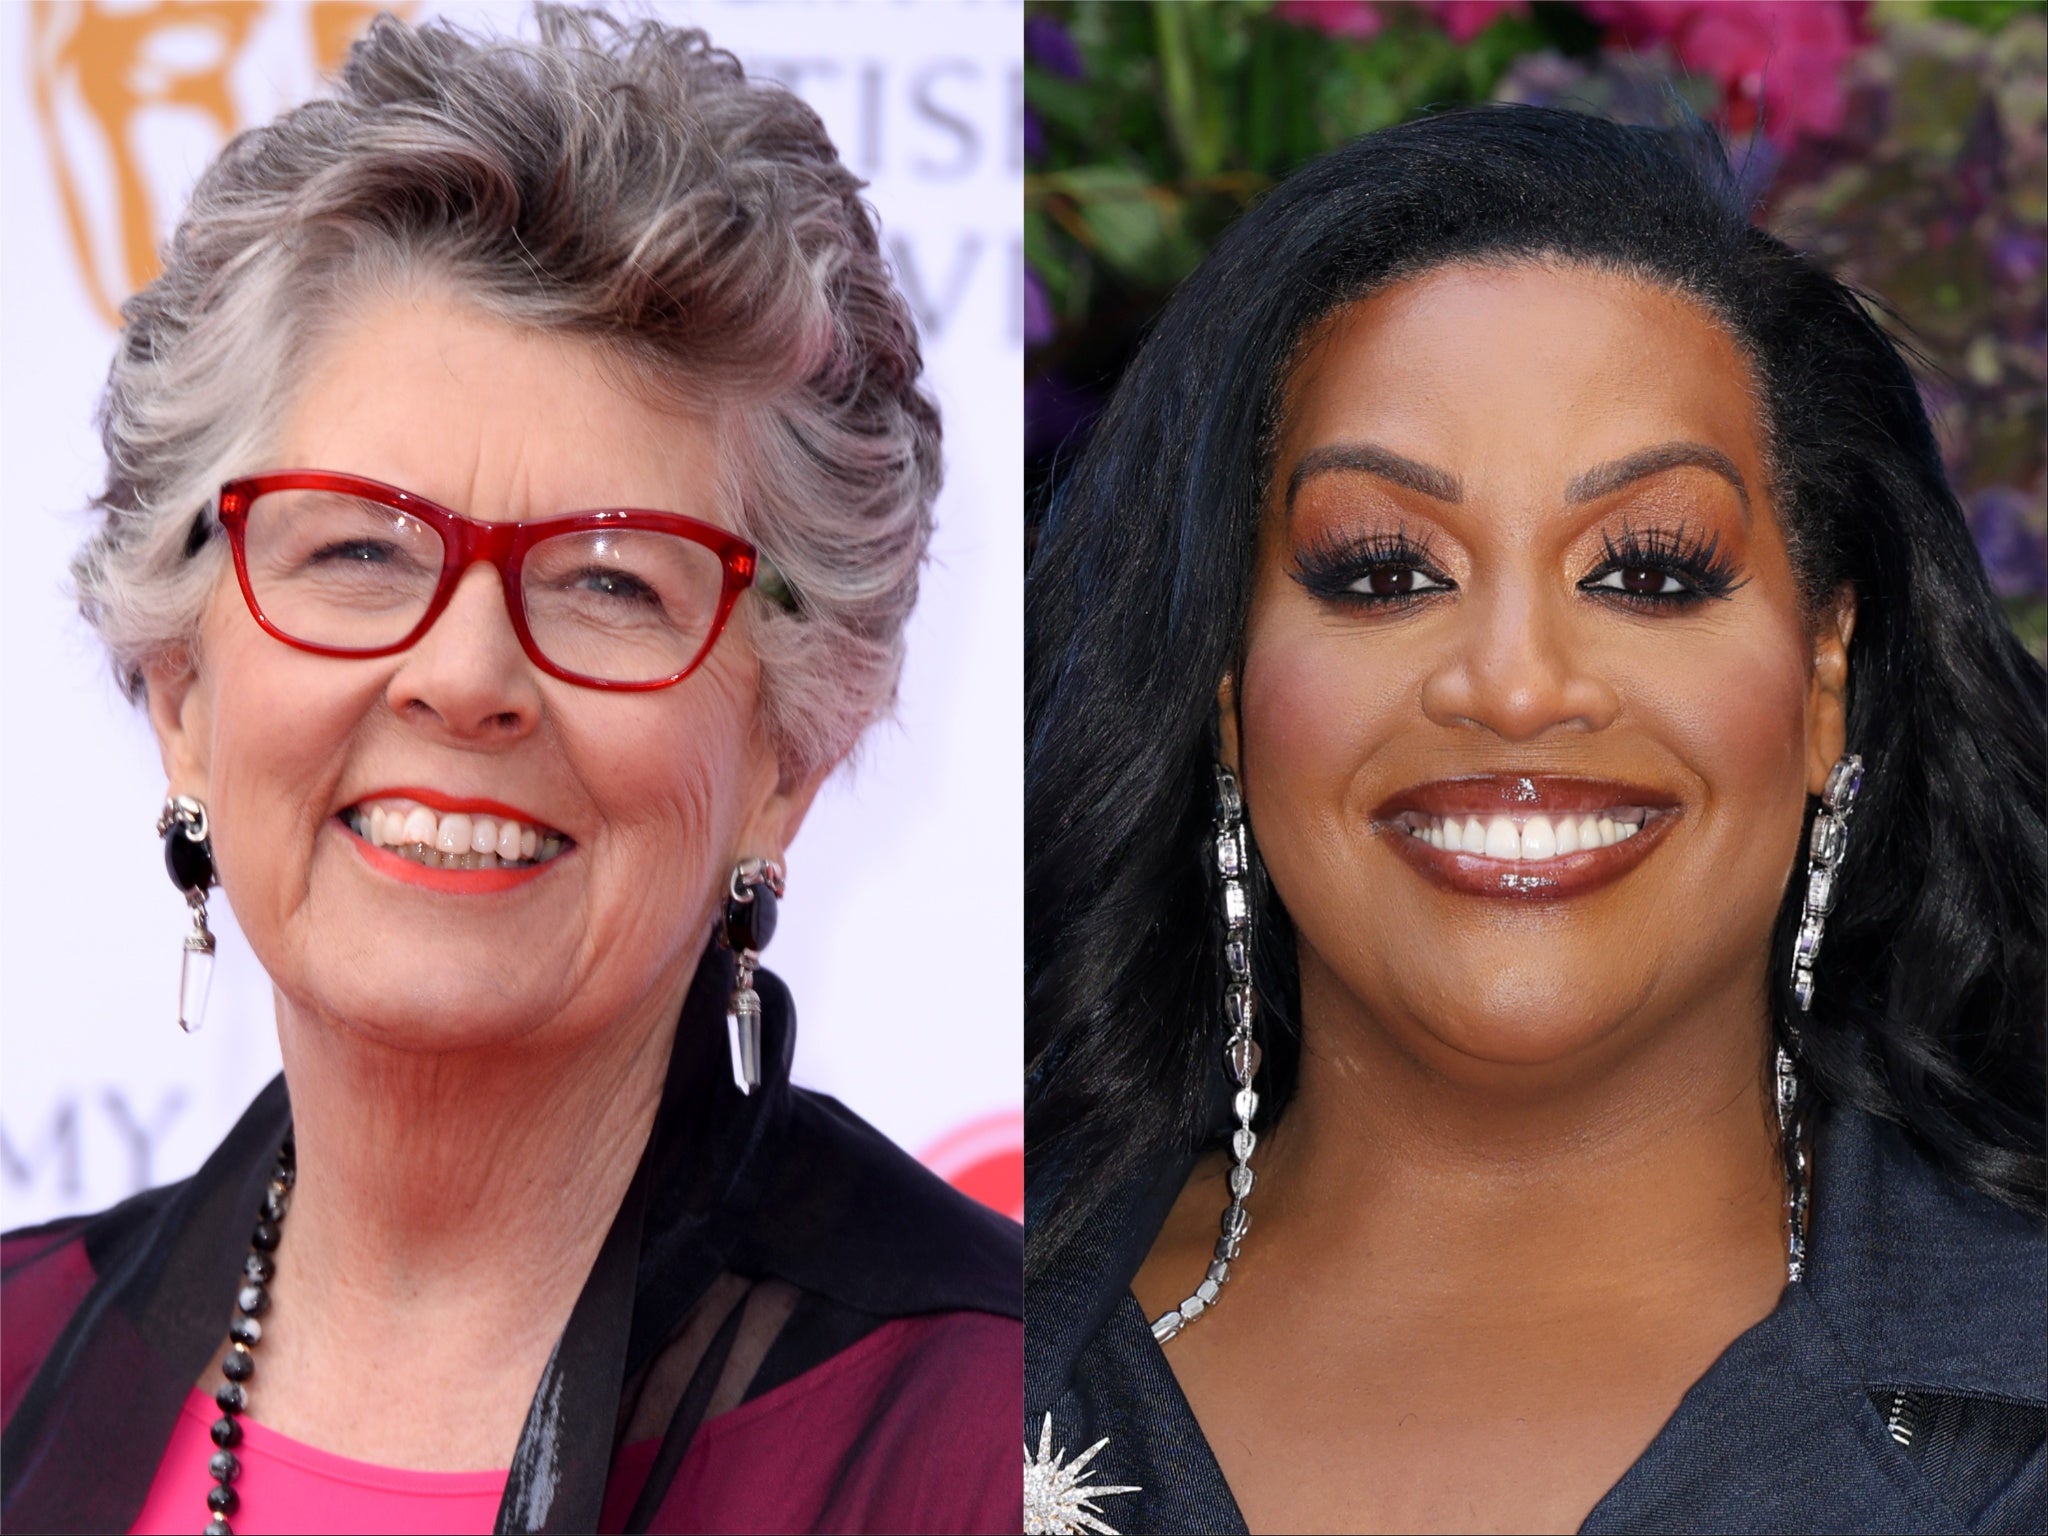 Prue Leith (left) and Alison Hammond